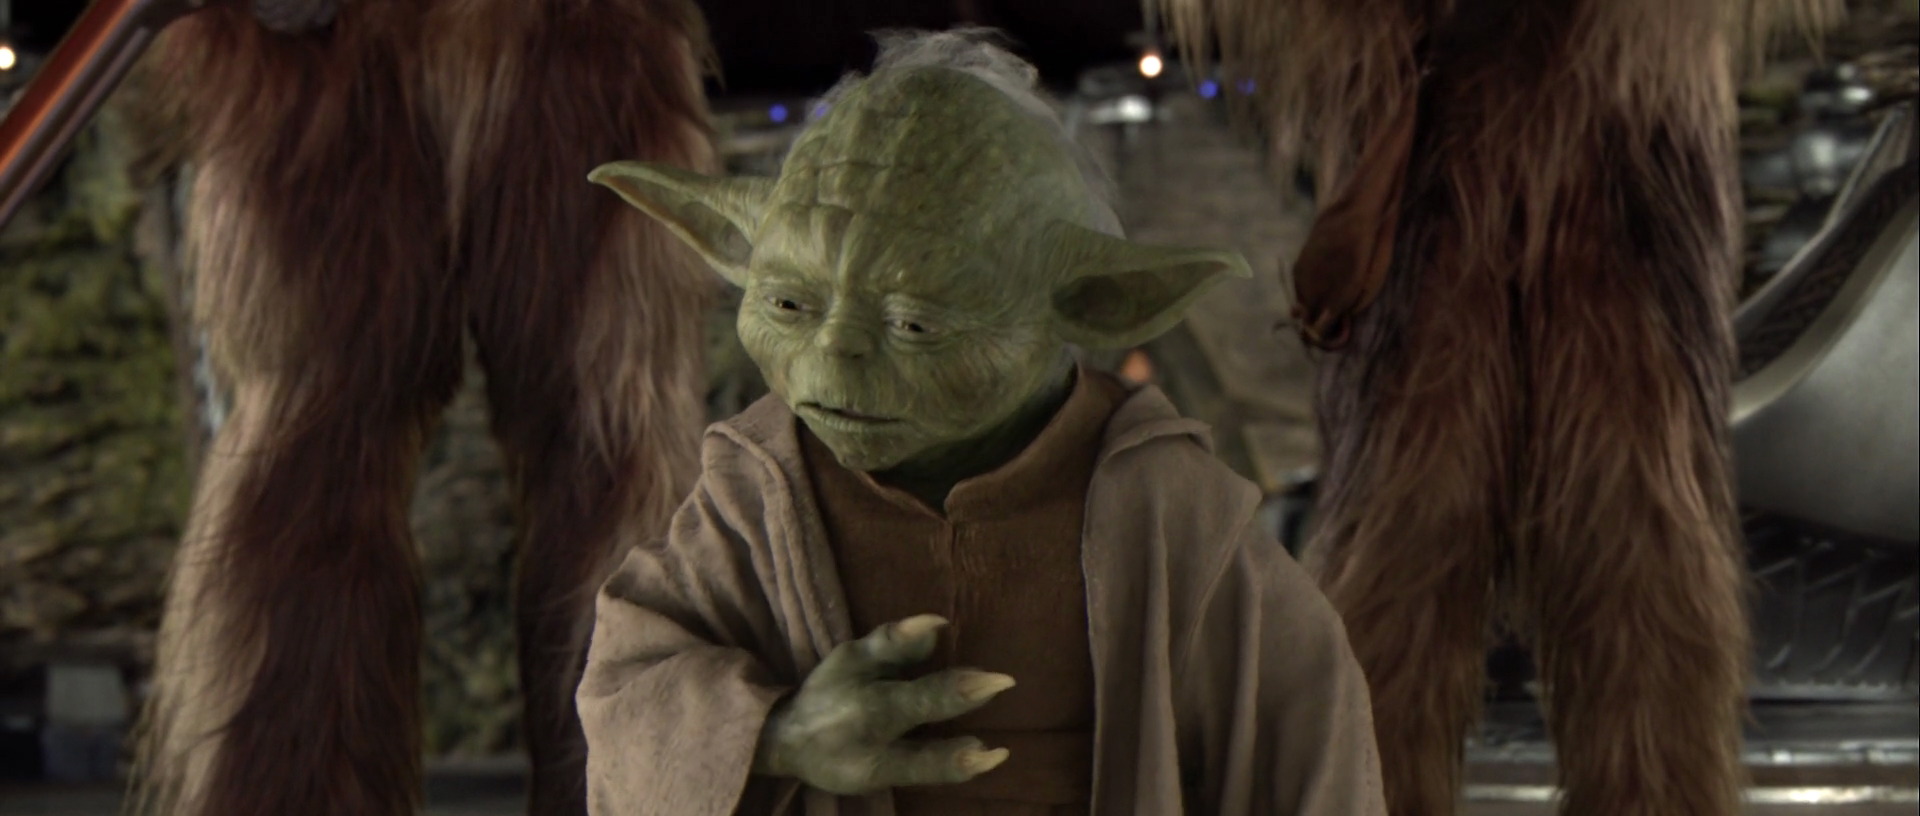 Yoda feels the s of each Jedi as they are assassinated by their own troops